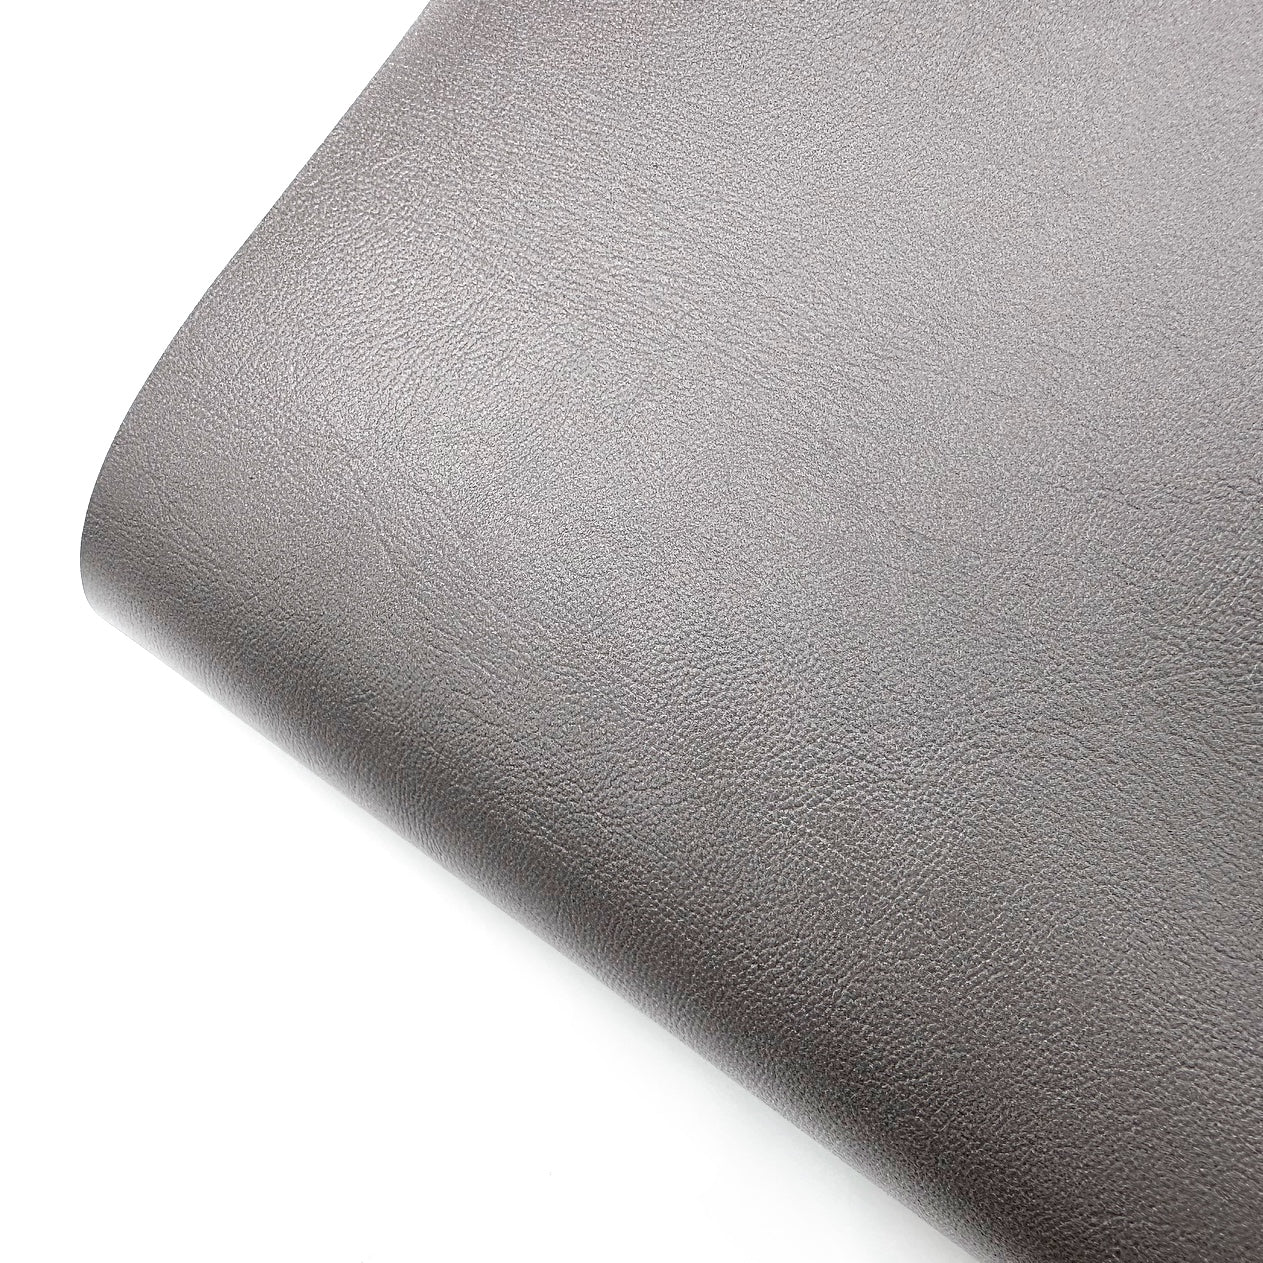 King Charles Grey Faux Leather Fabric Sheets